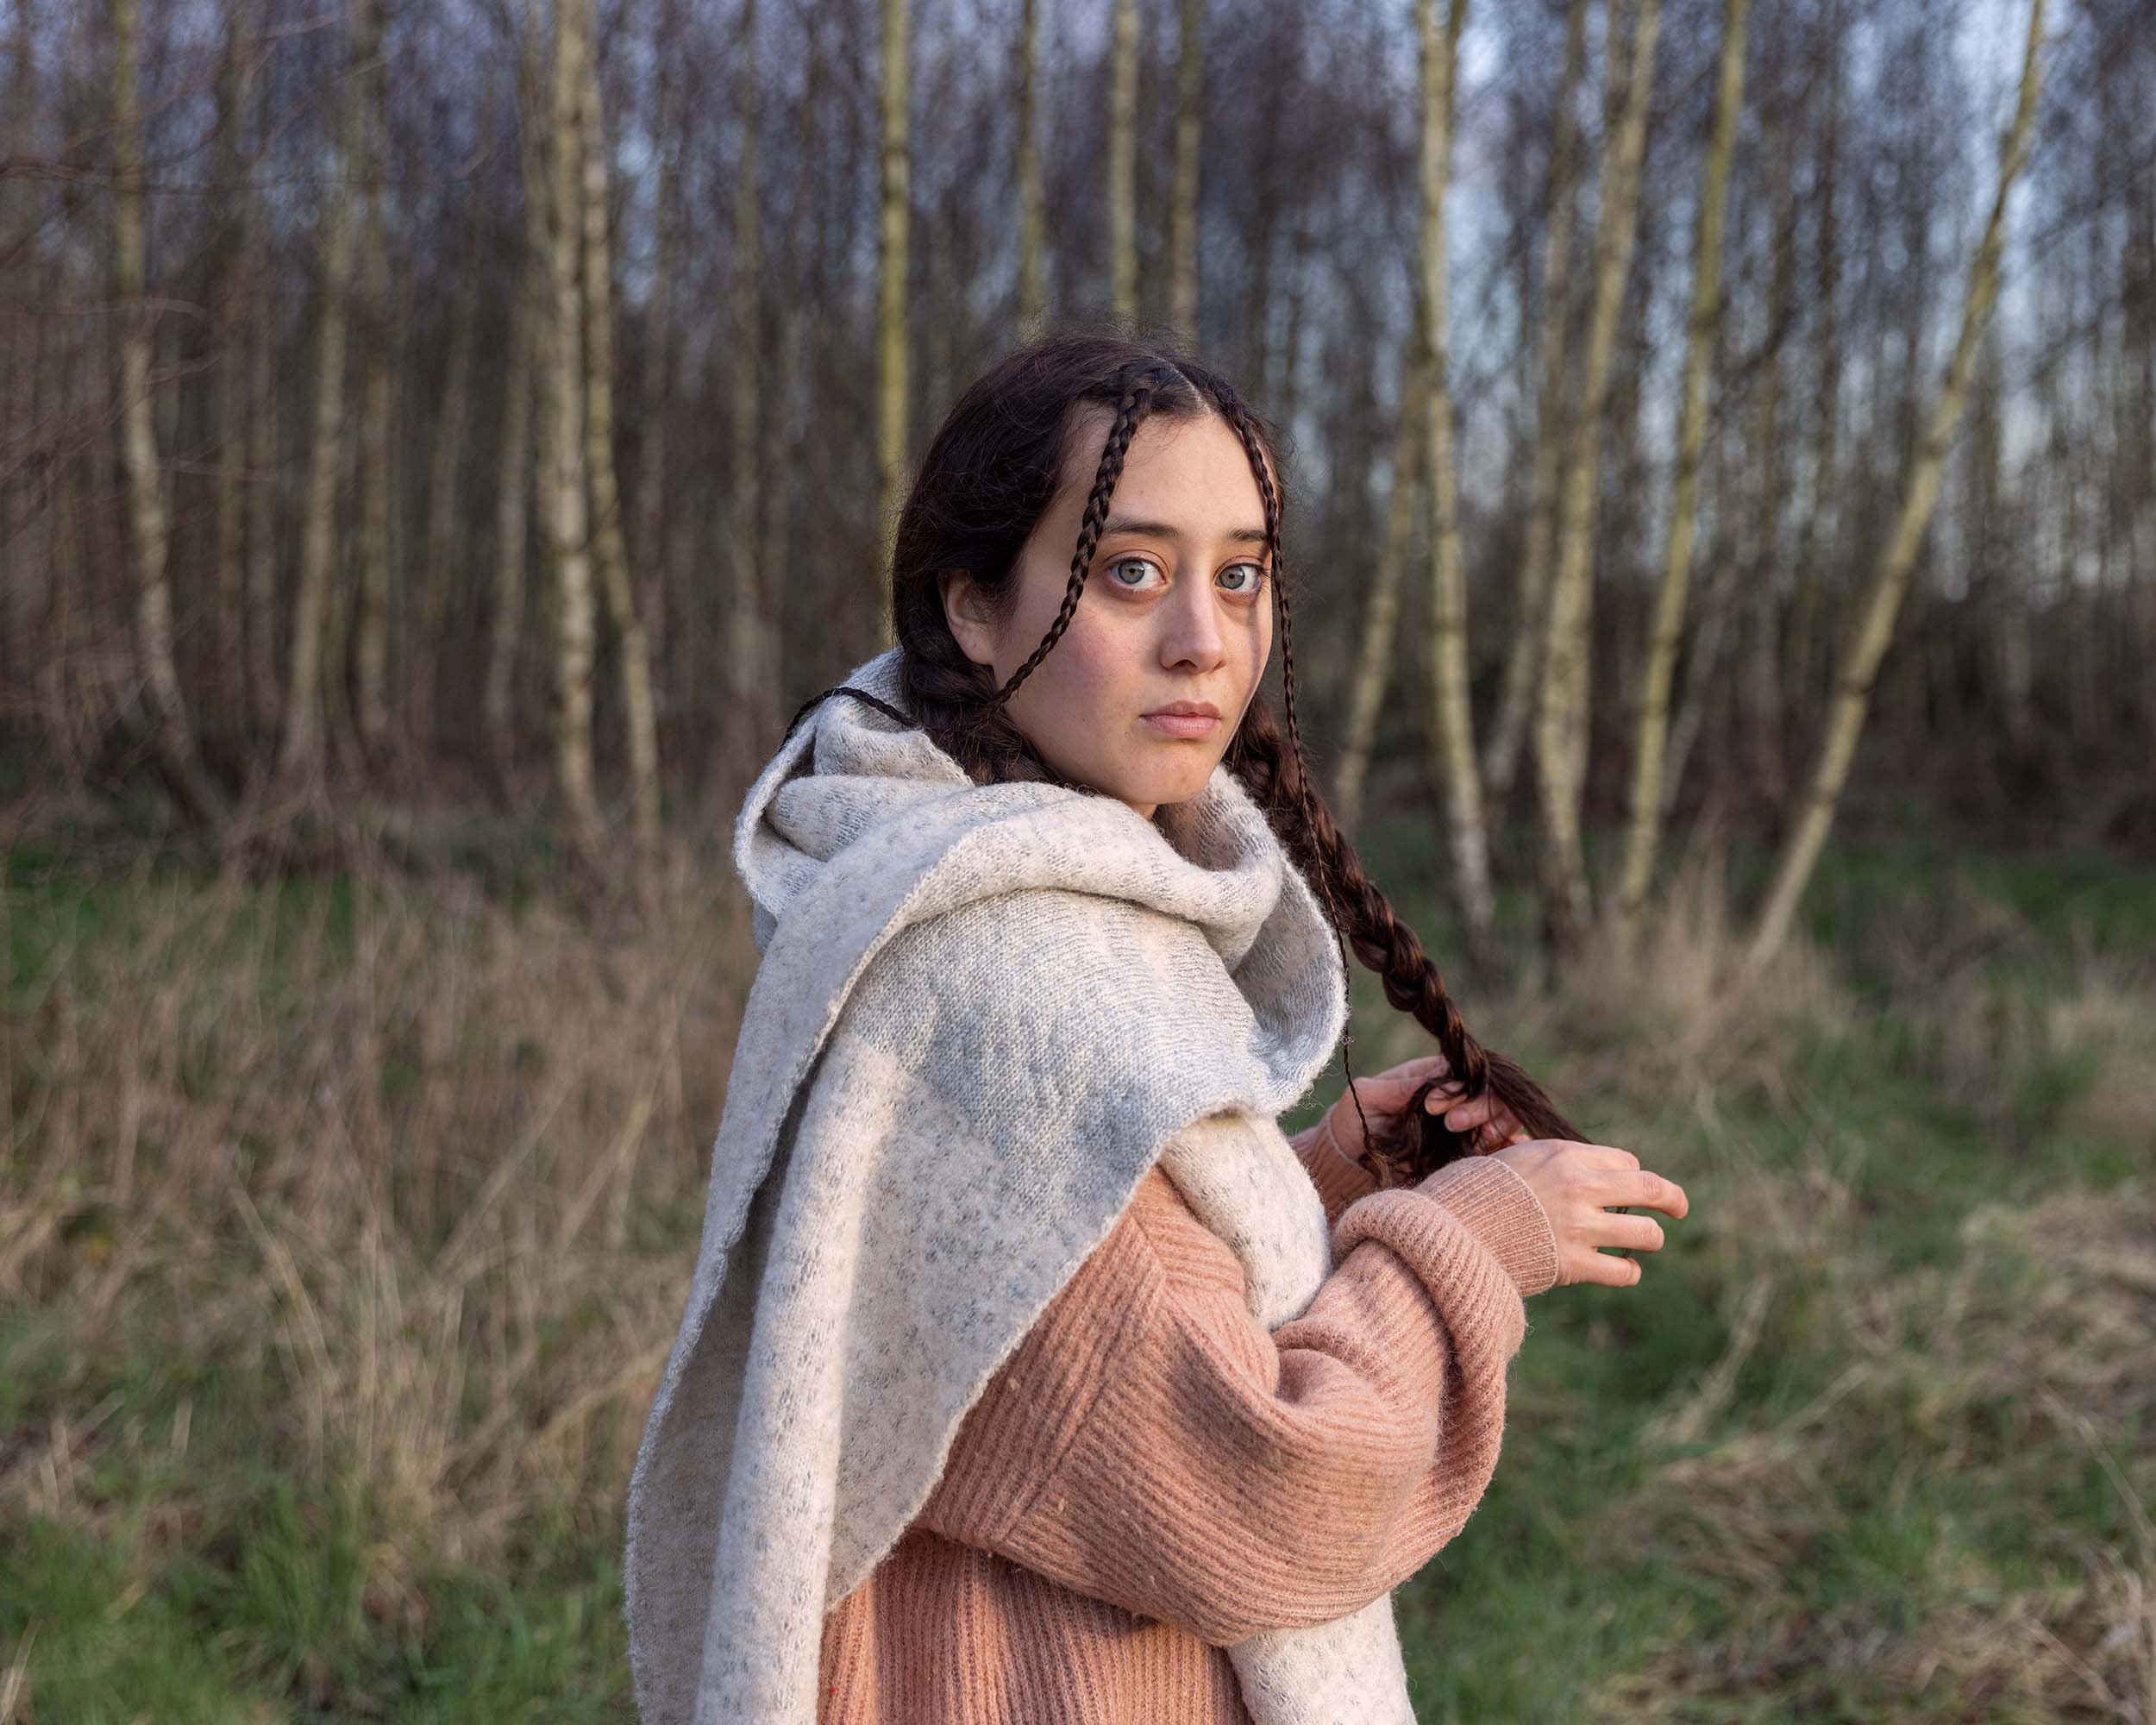 Portrait of a girl with braided hair in a forest wearing comfortable winter clothes. She's wearing a fluffy pastel pink jumper and a bulky knit scarf. Image by Bieke Depoorter